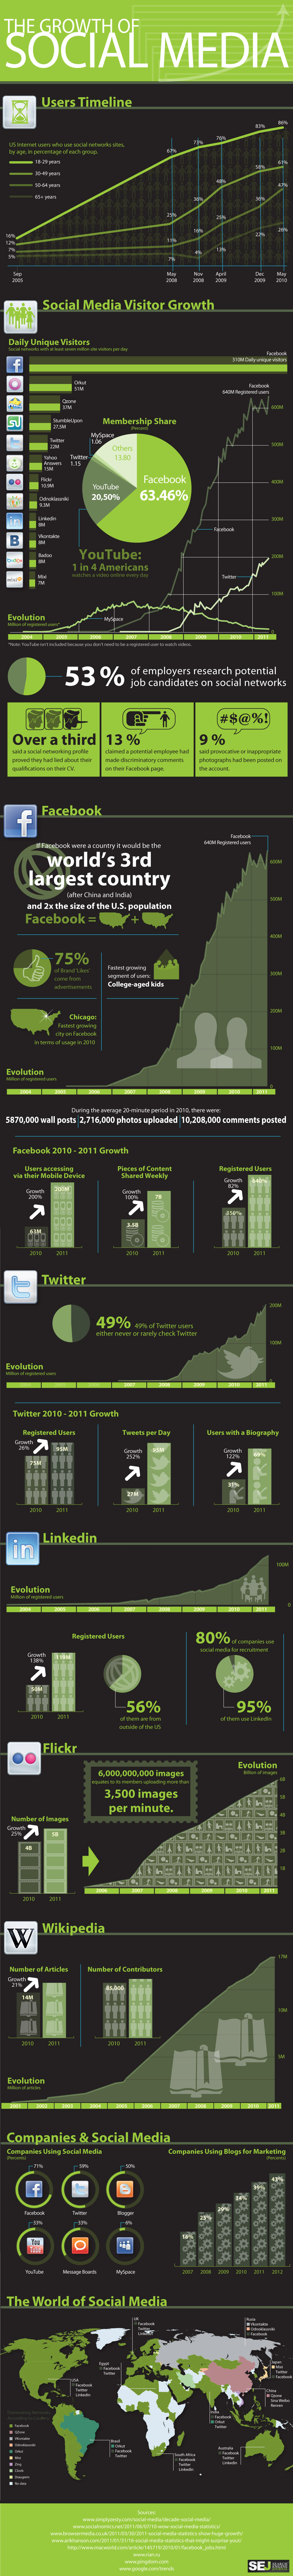 The Growth of Social Media: AnÂ Infographic